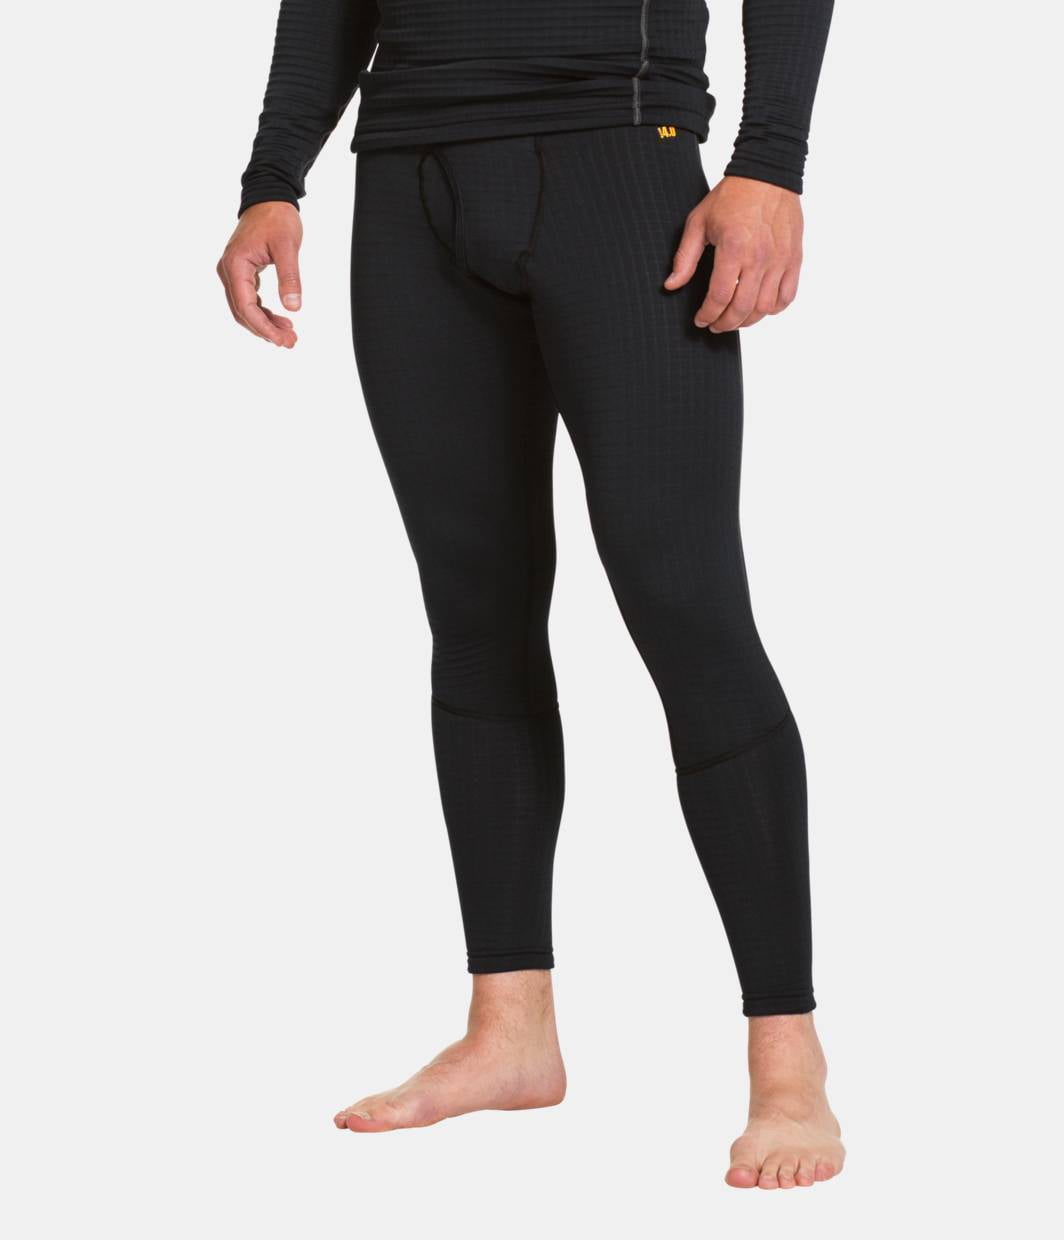 under armour thermal long johns